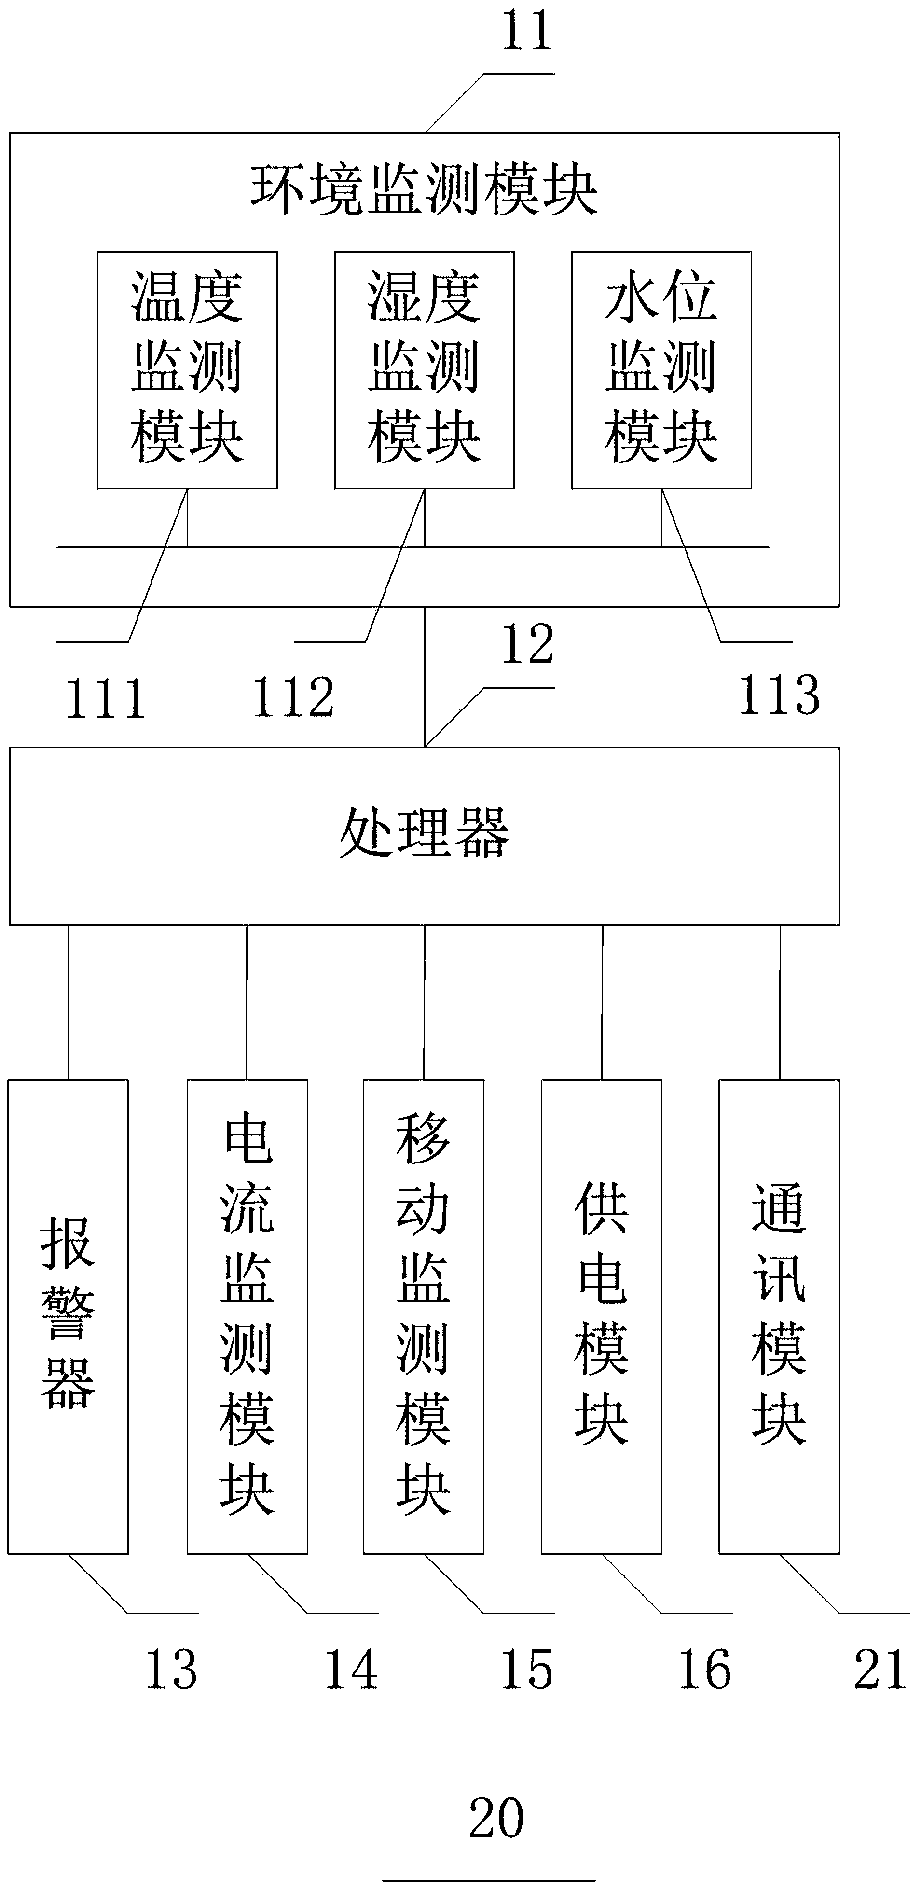 Underground cable monitoring device and system